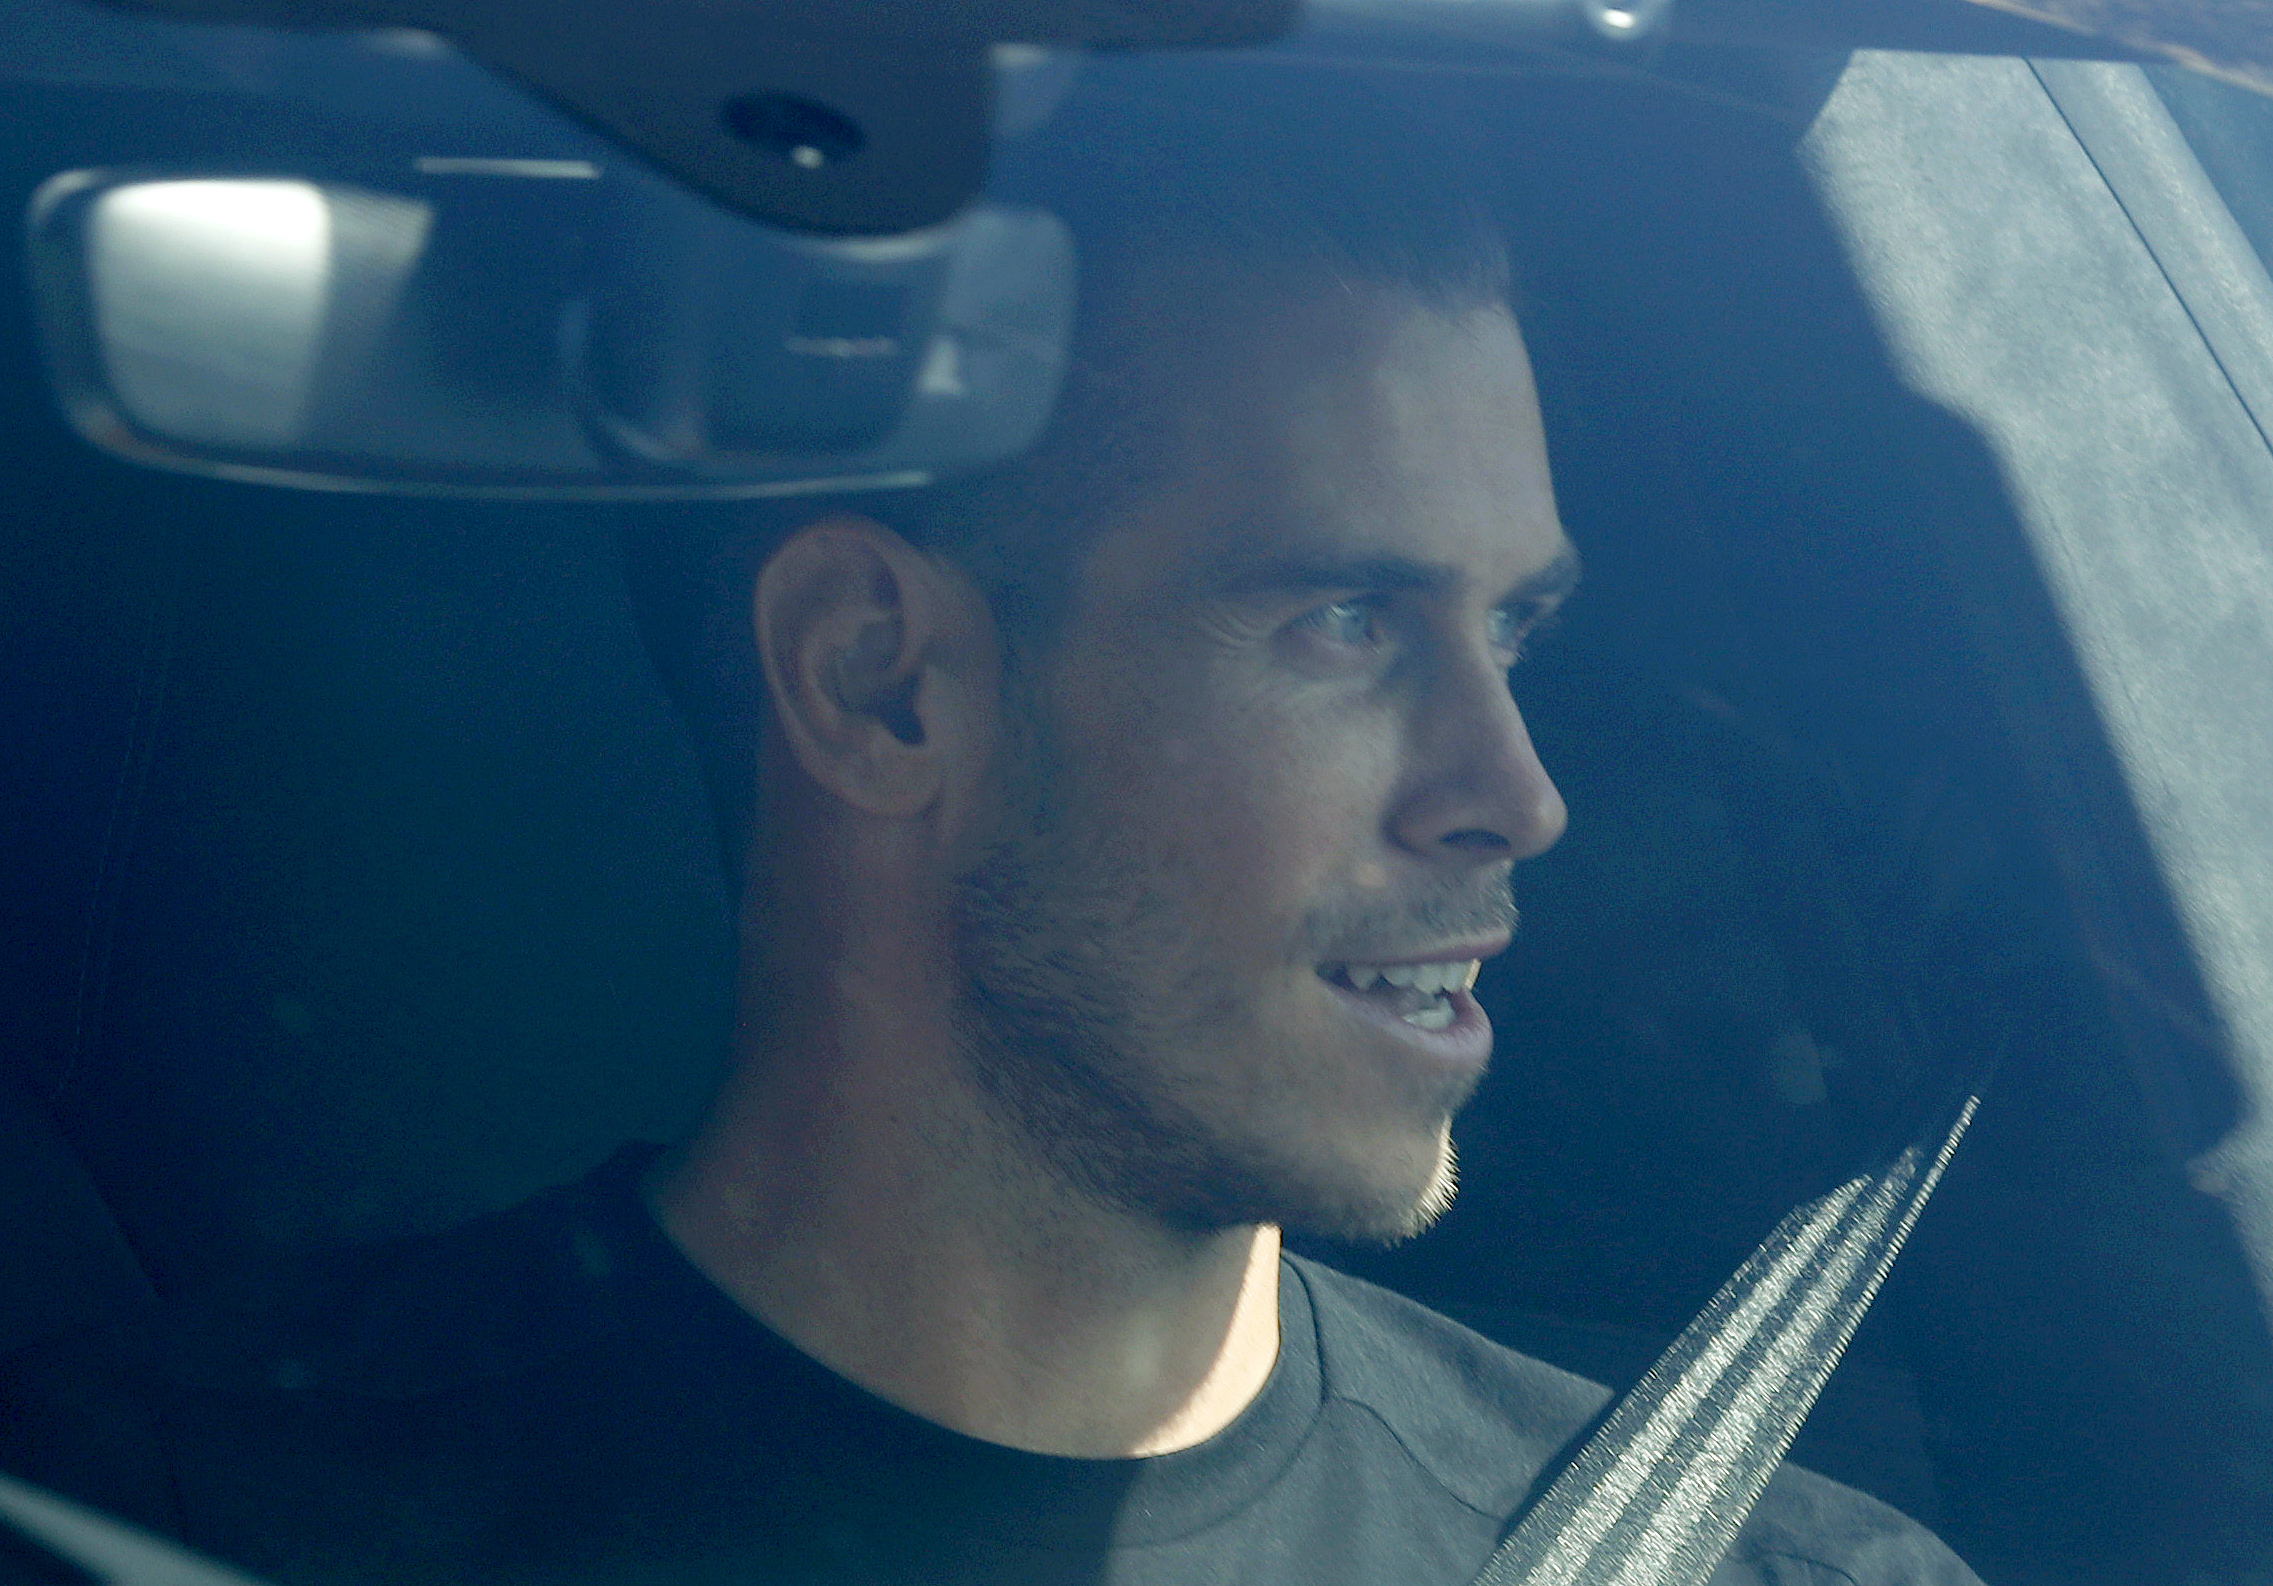 Gareth Bale arrived at the training ground on Friday